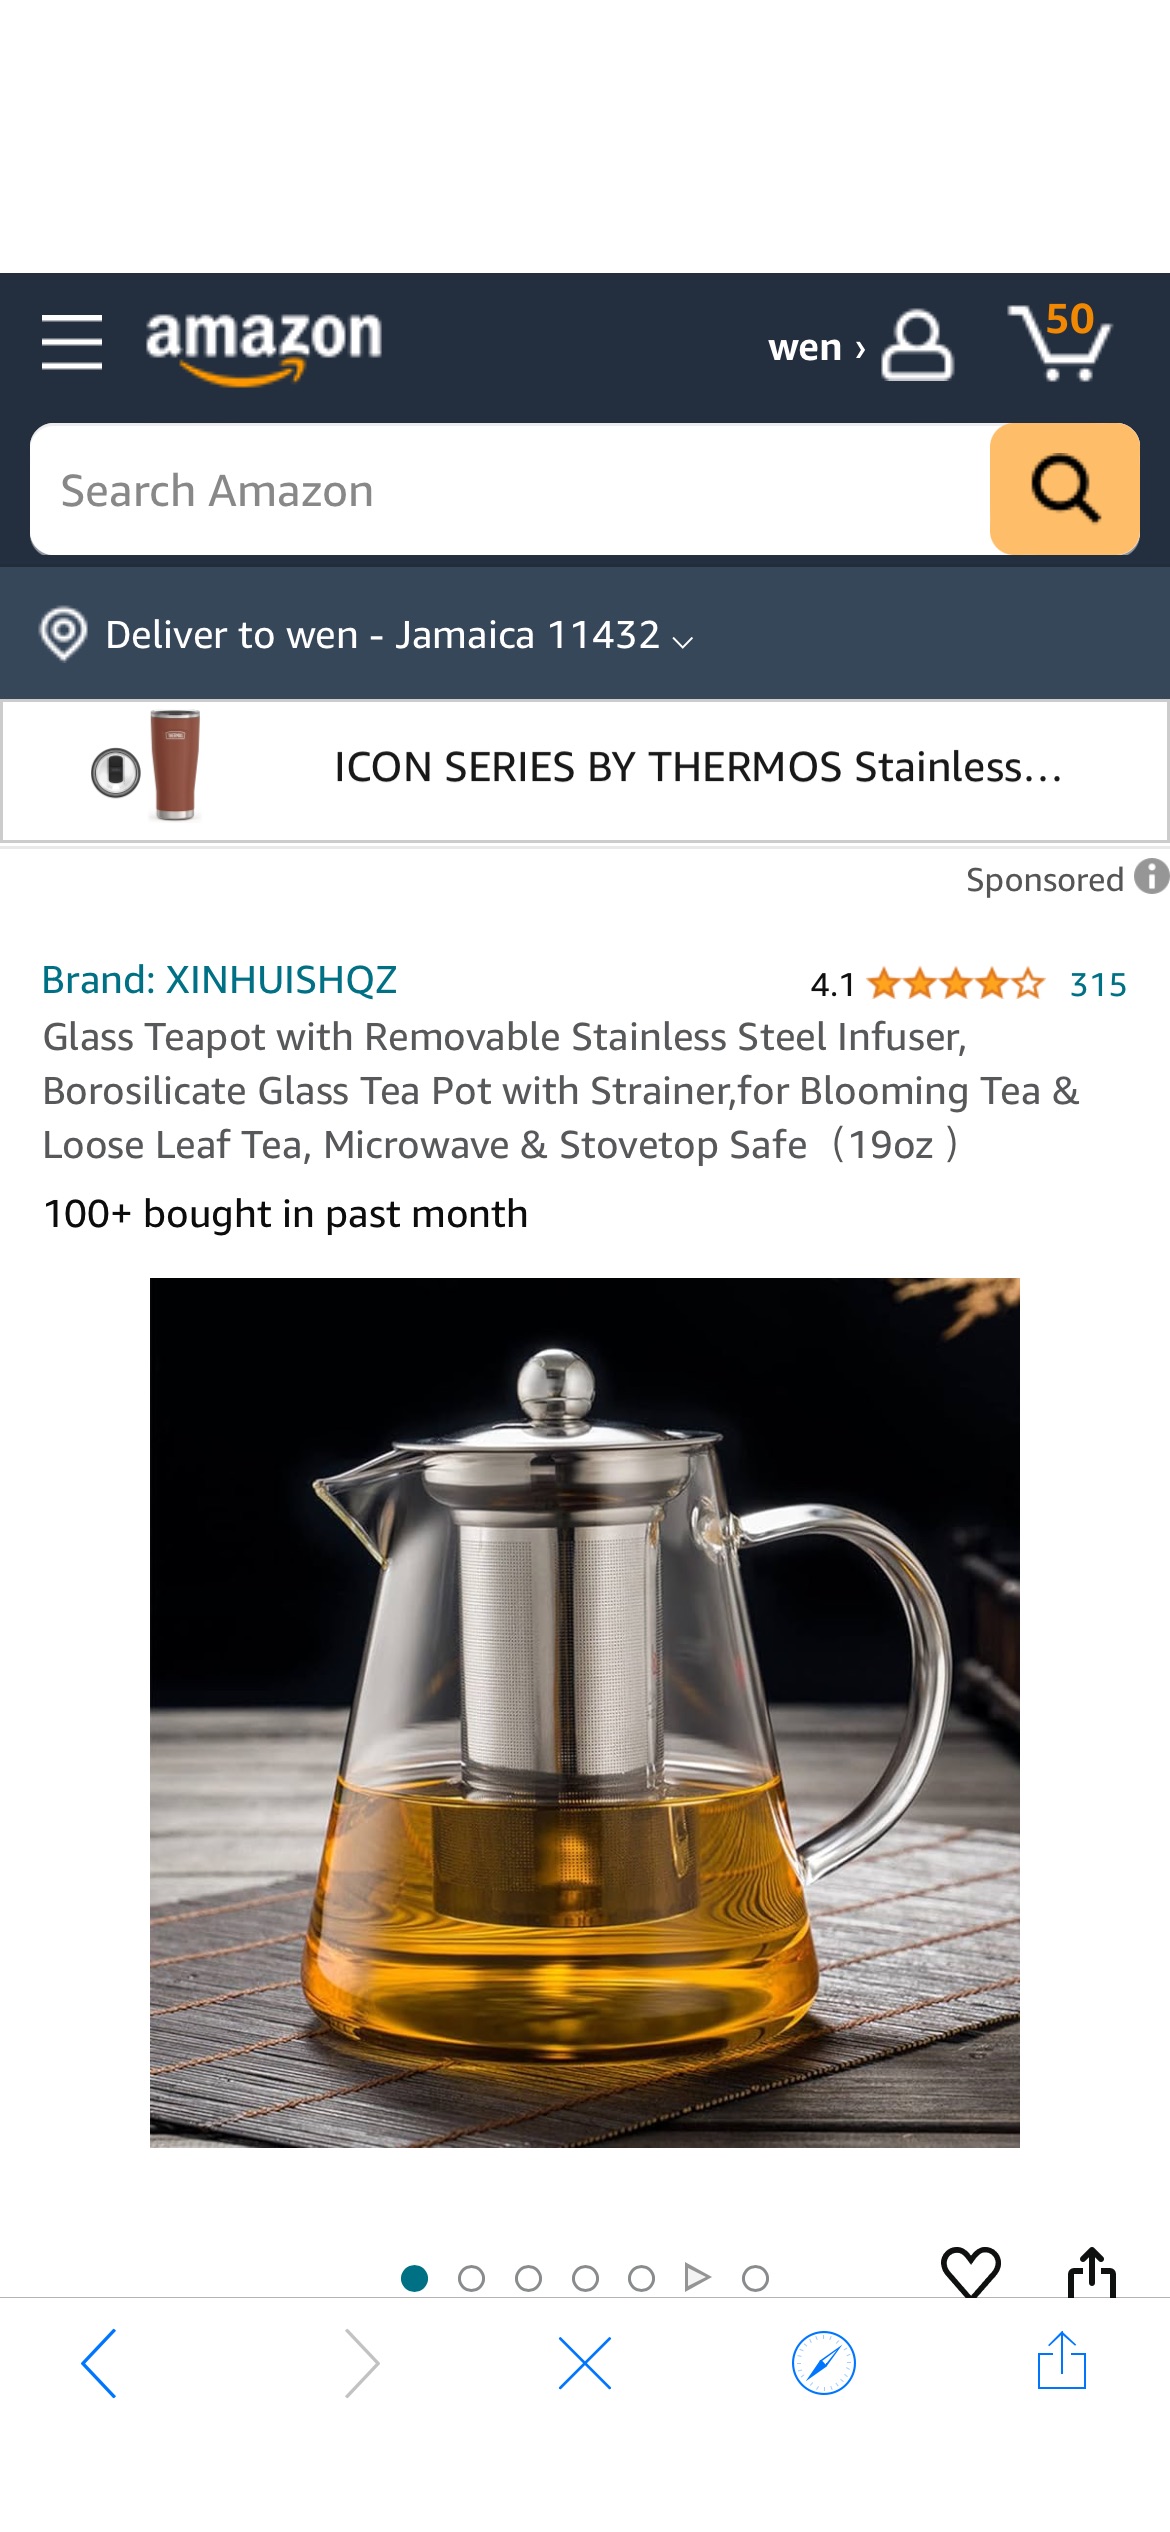 Amazon.com | Glass Teapot with Removable Stainless Steel Infuser, Borosilicate Glass Tea Pot with Strainer,for Blooming Tea & Loose Leaf Tea, Microwave & Stovetop Safe（19oz ）: Teapots